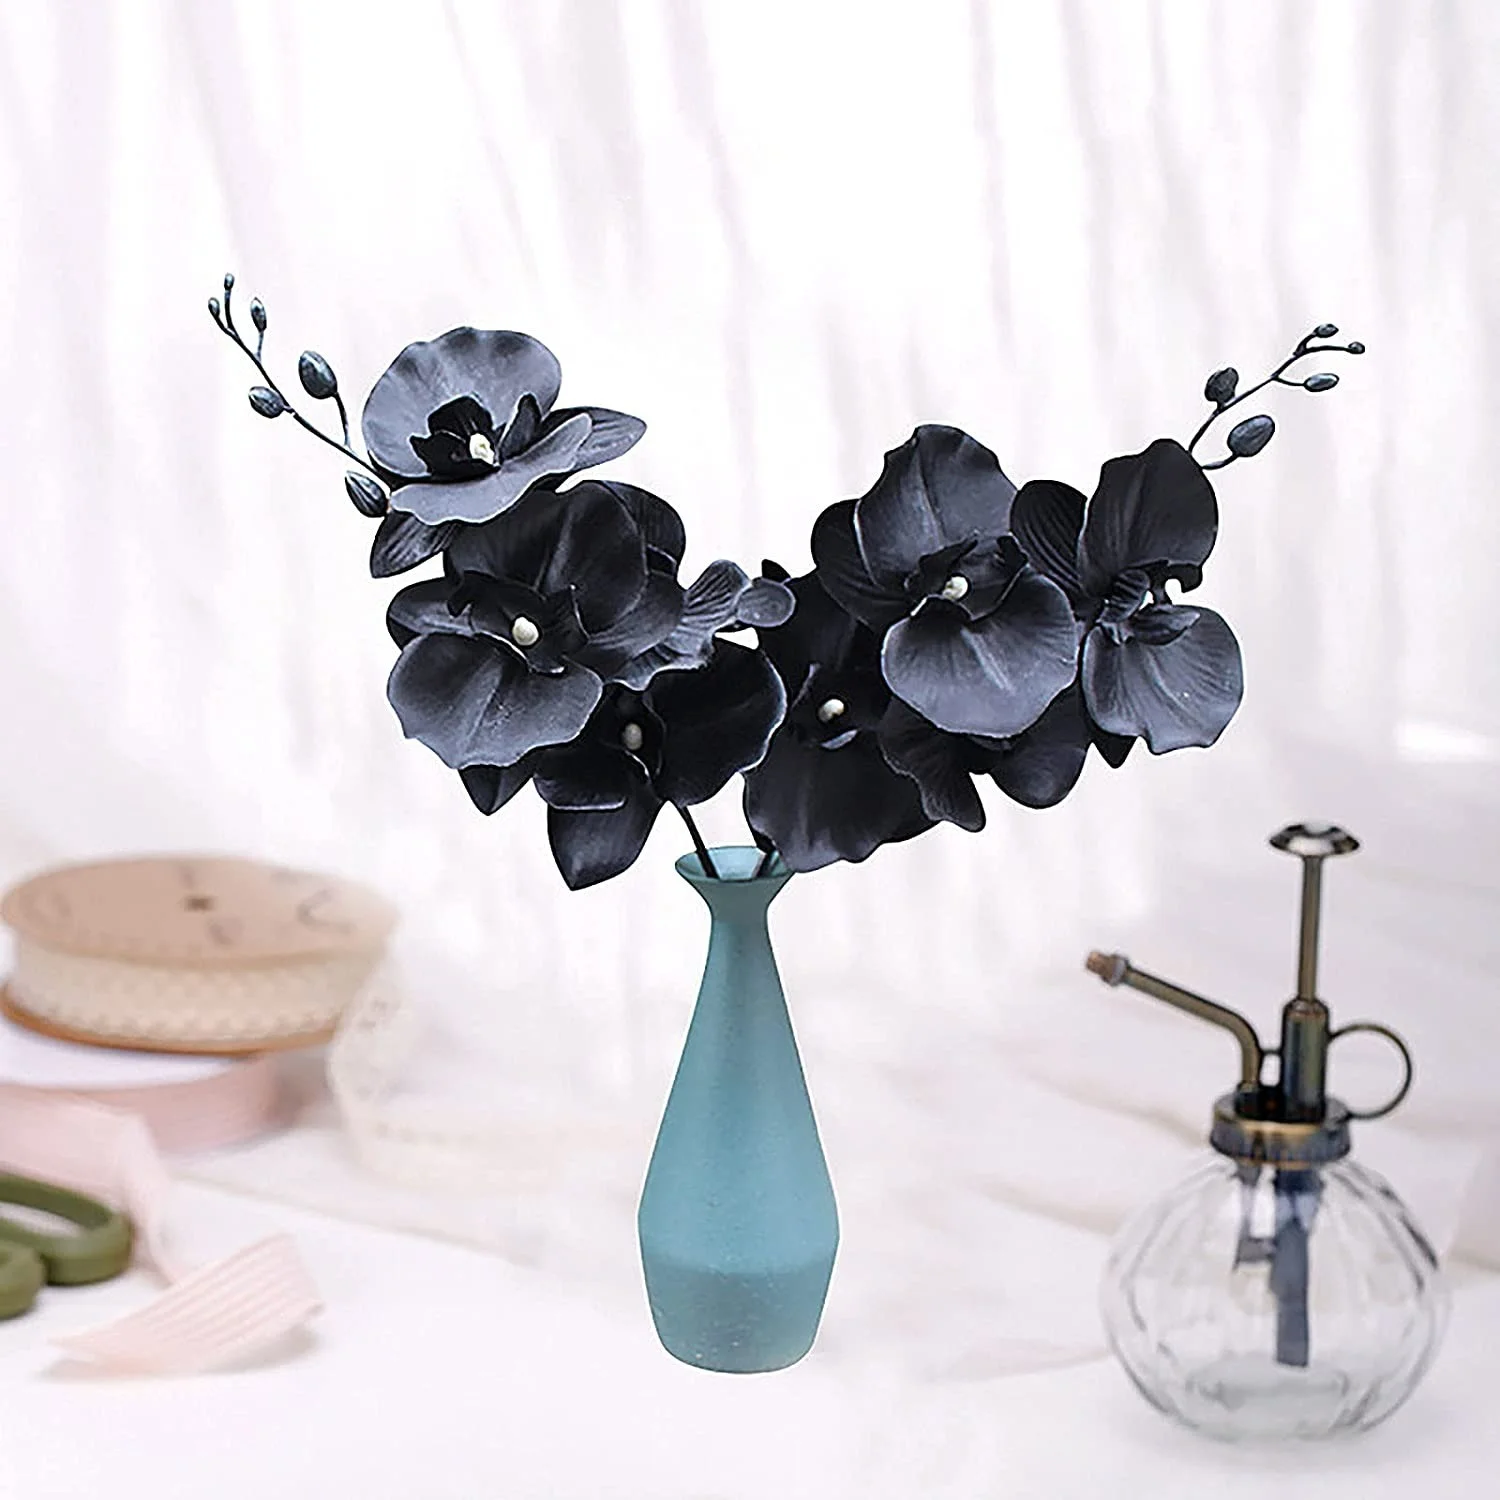 

Black Artificial Orchid Stems Silk Real Touch Dancing Simulation Flower Artificial Butterfly Branches for Home Office Decoration